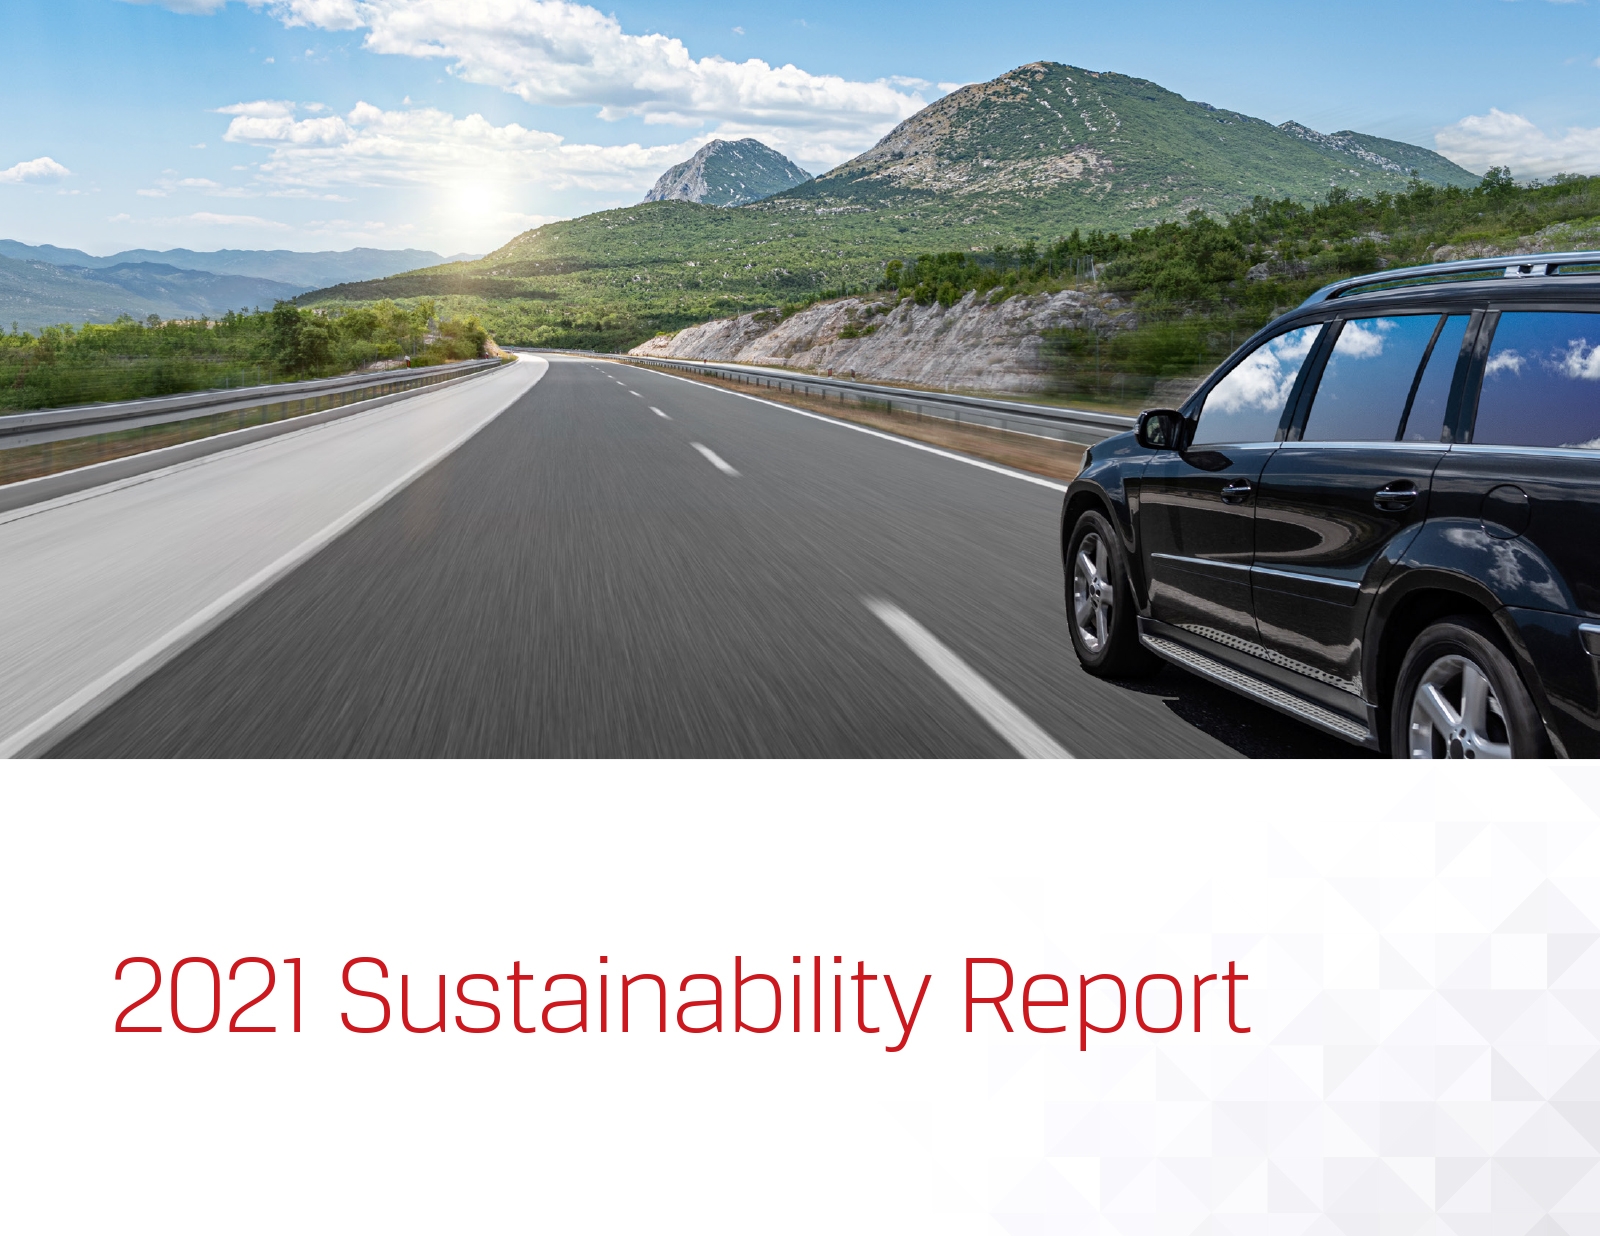 2021 Sustainability Report Cover